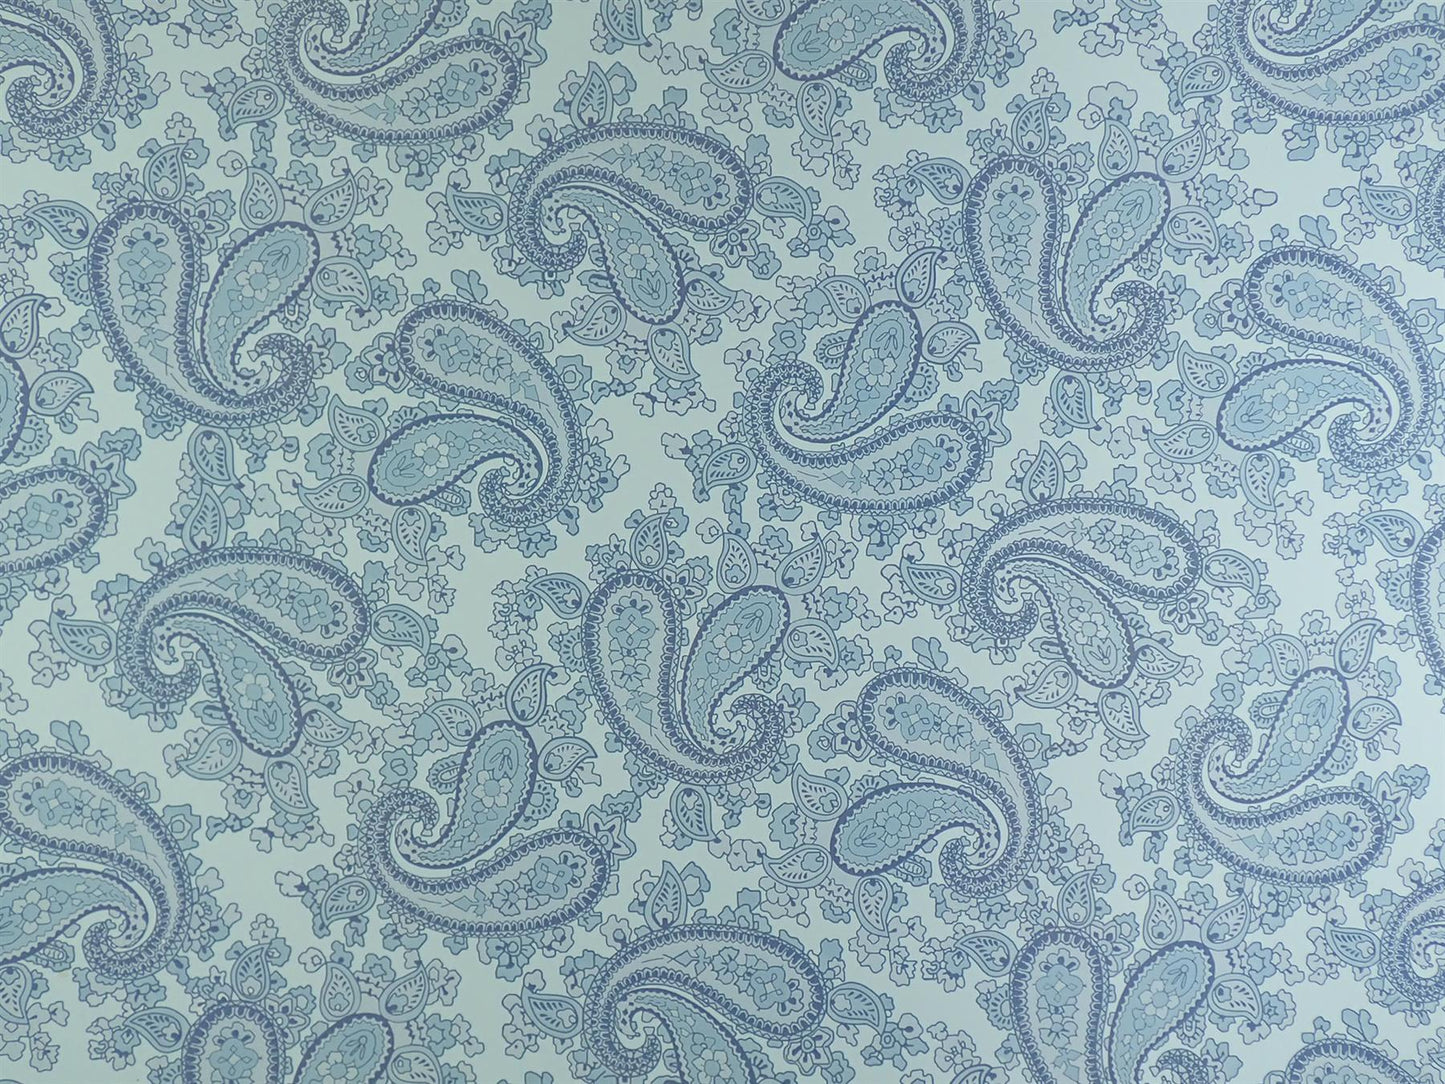 Luthitec Clear Backed Powder Blue Paisley Paper Decal Sheet - 420x295mm (16.5x11.61")